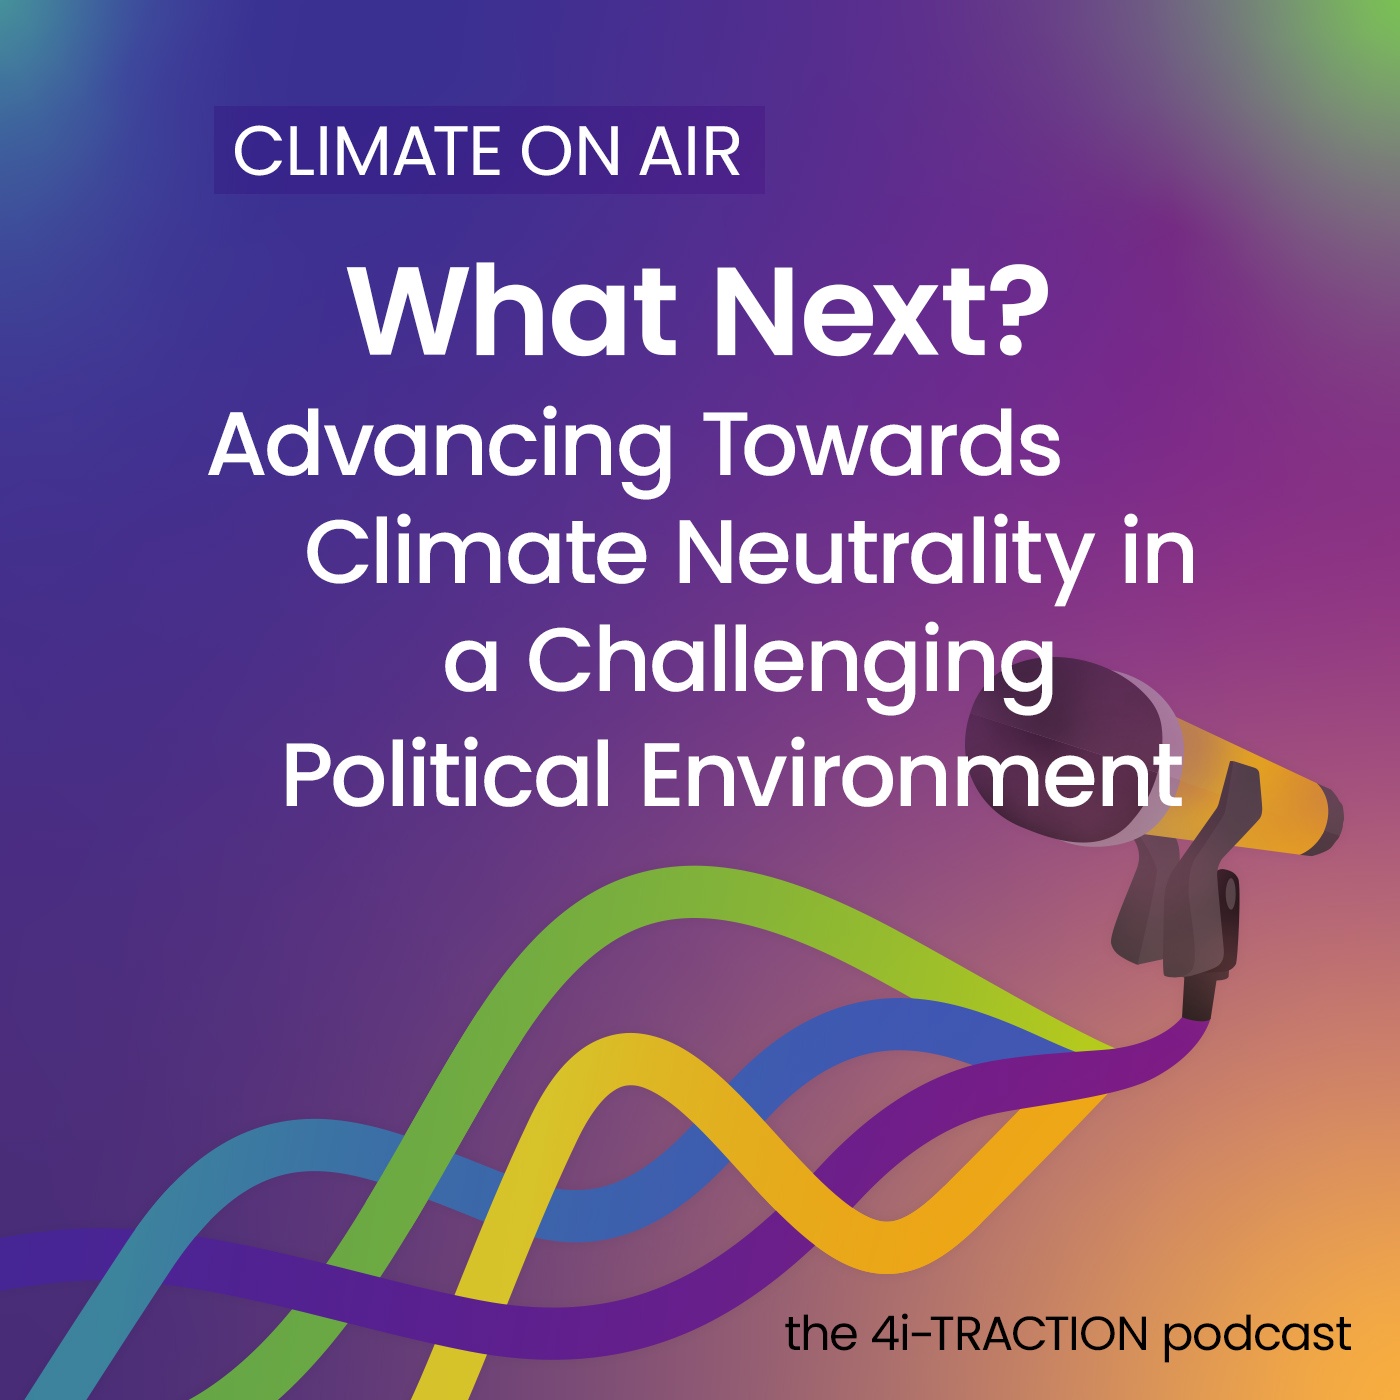 What Next? Advancing Towards Climate Neutrality in a Challenging Political Environment